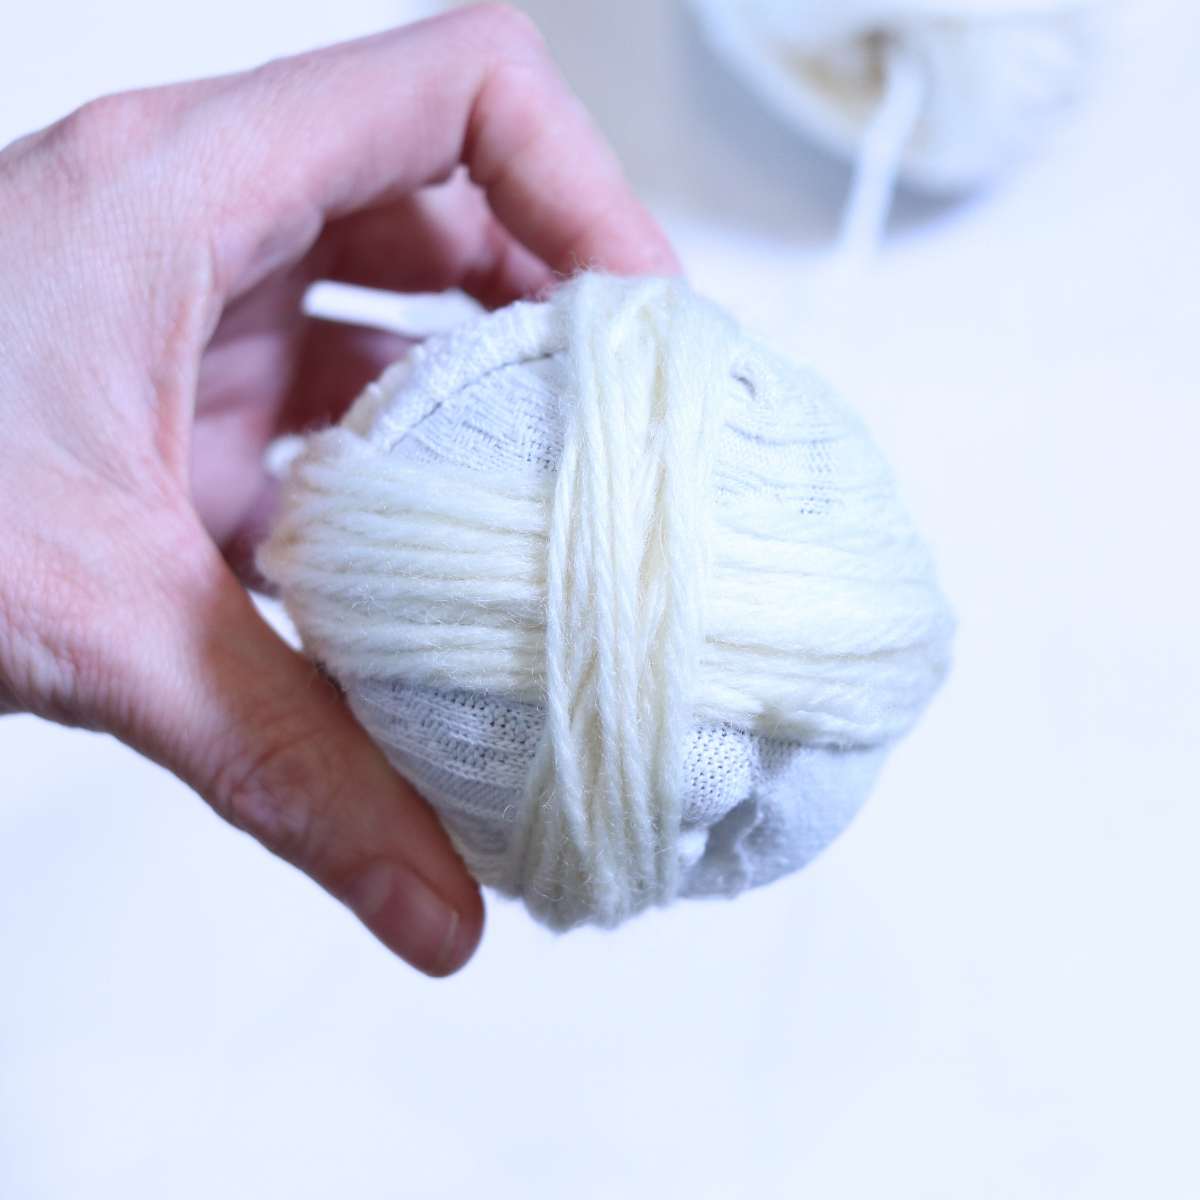 A homemade dryer ball in progress. A womans hand is holding onto the ball that has been wrapped with cream colored yarn.